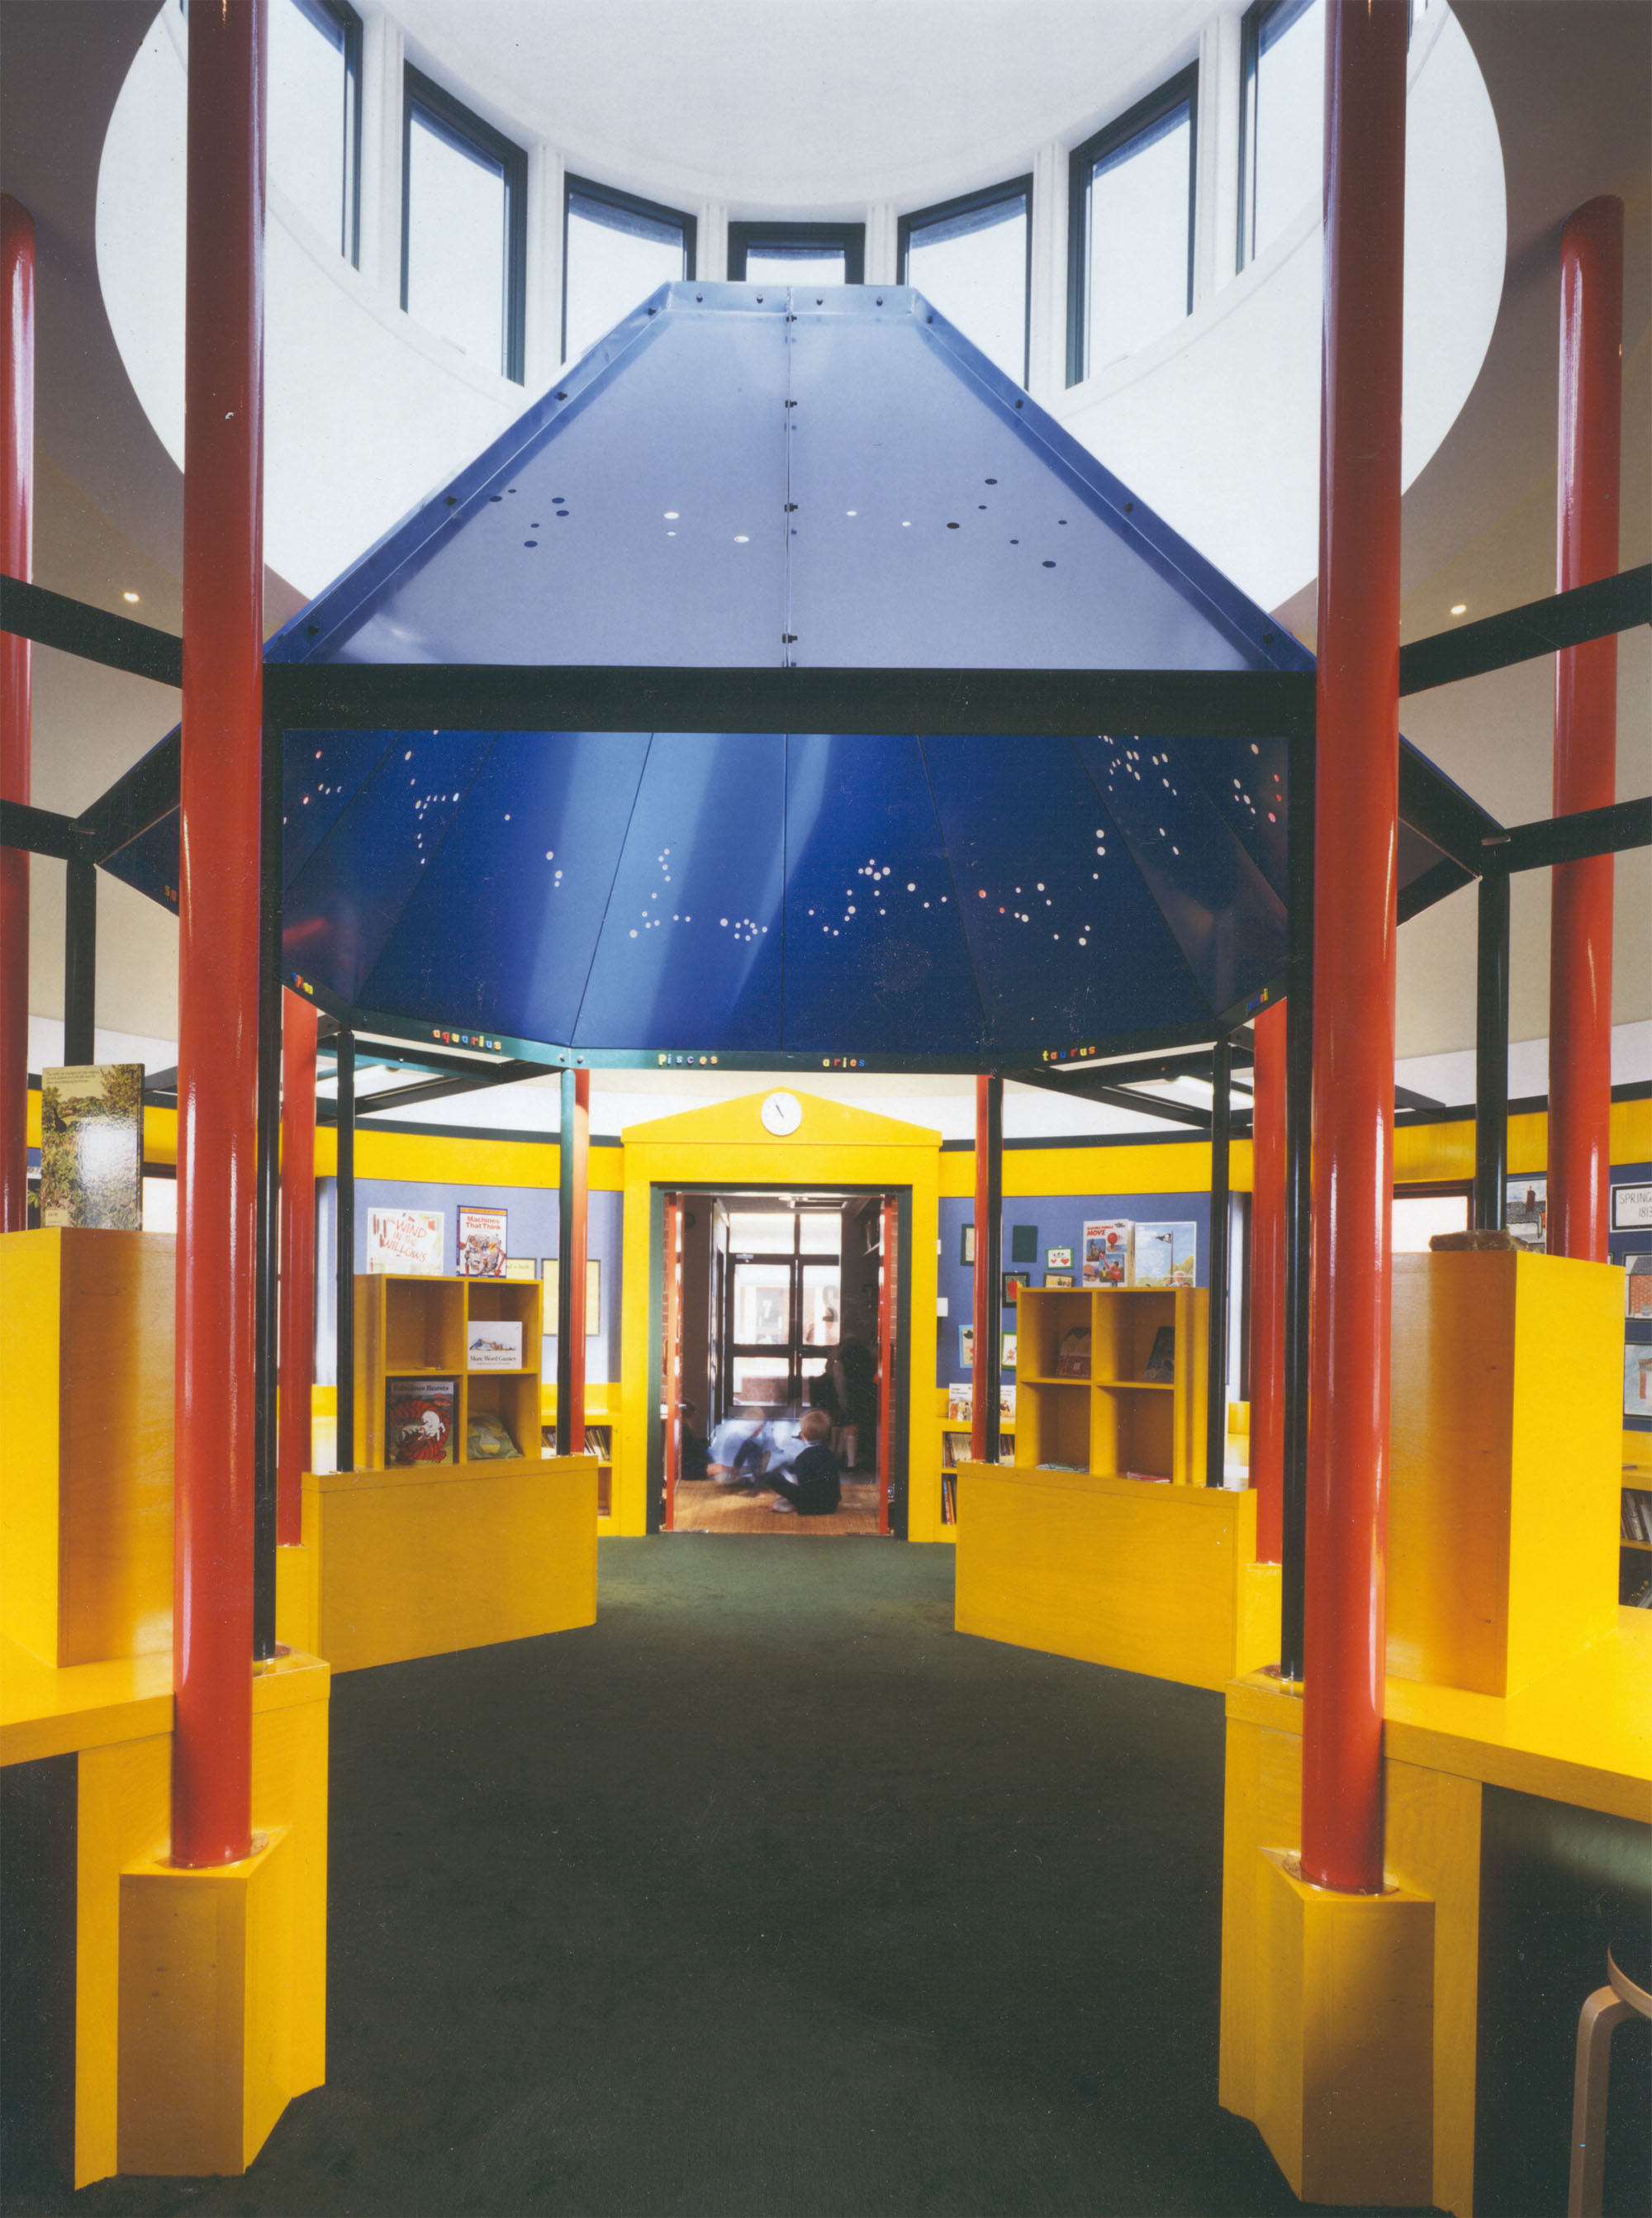 The interior of the Bishop Wilson Memorial Library shows the bright red columns, blue painted canopy and yellow door frames, shelves and wall coverings.